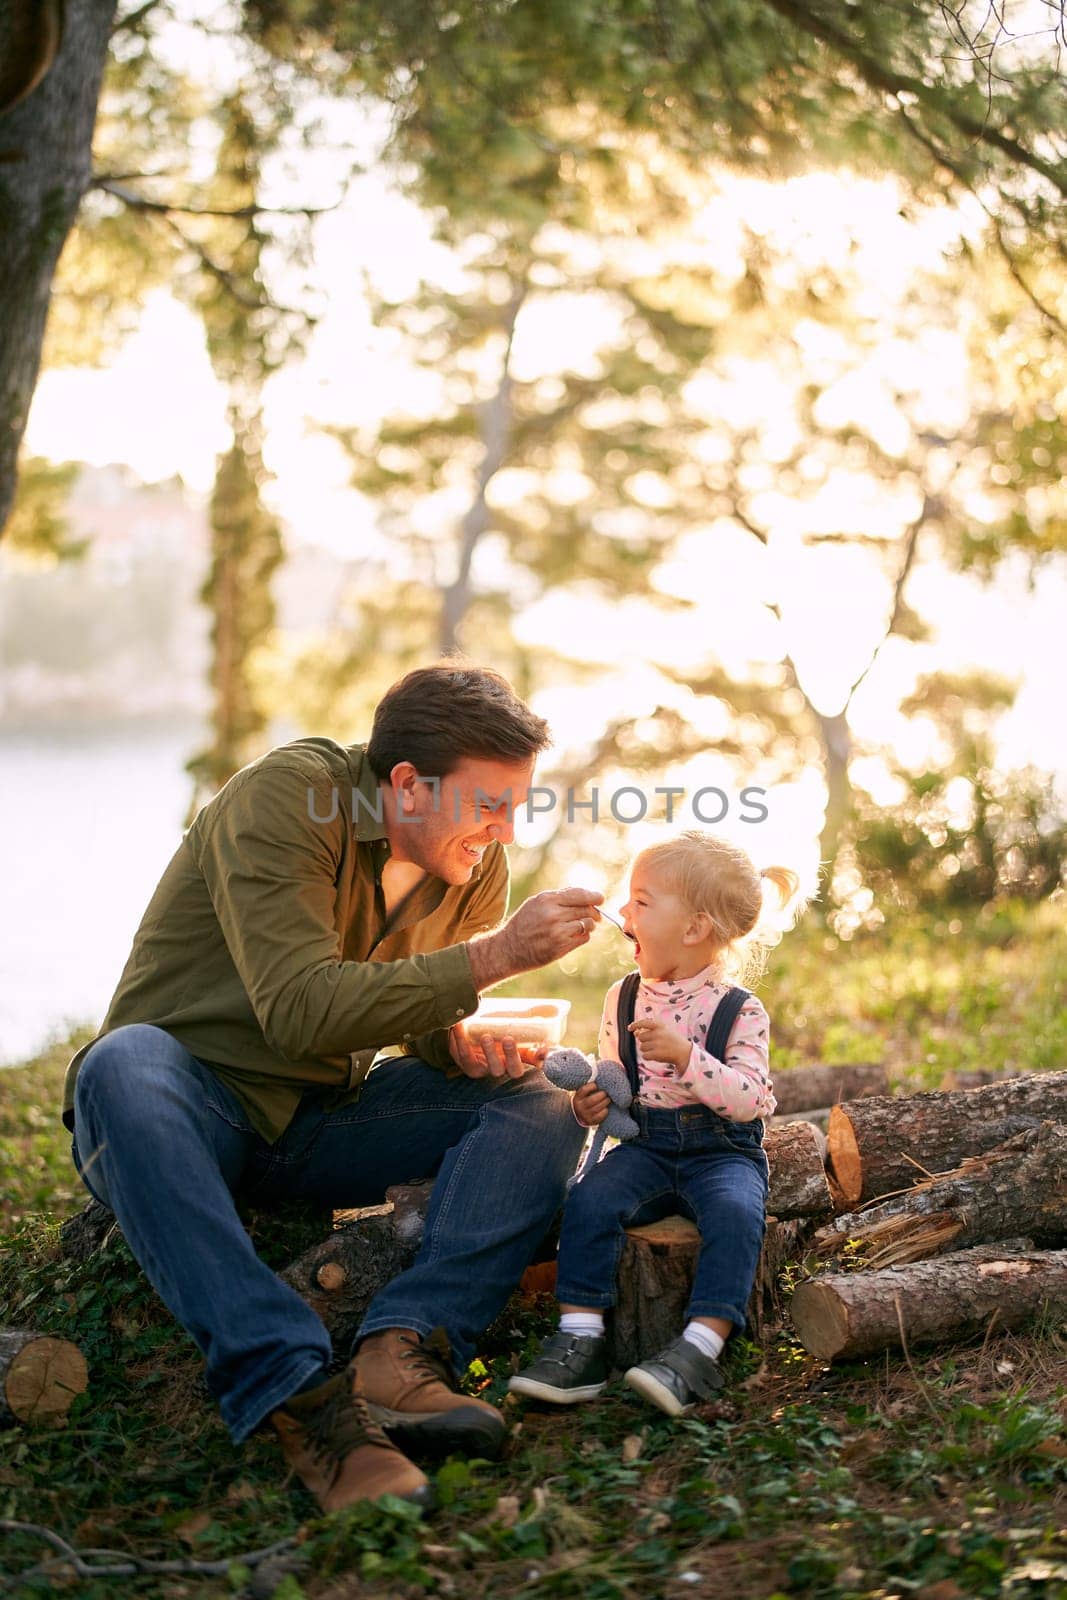 Dad feeding a little girl from a lunch box with a spoon while sitting on logs in the forest. High quality photo